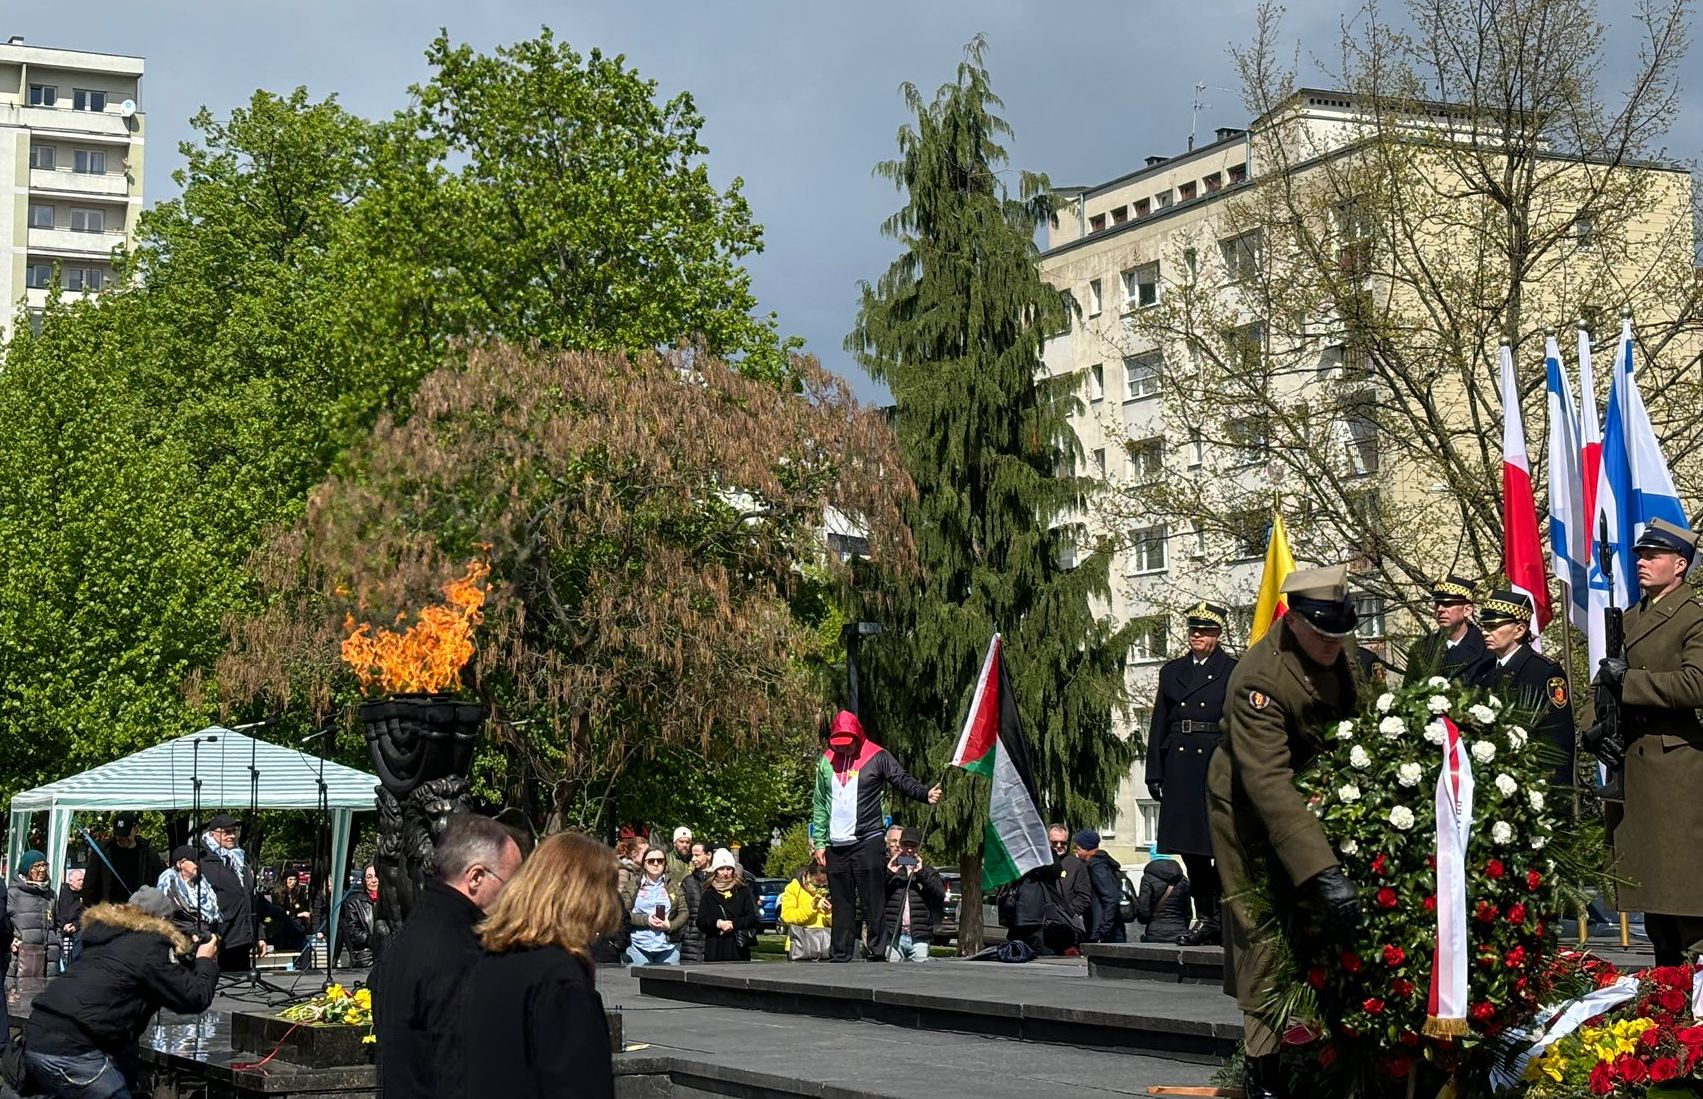 Pro-Palestinian demonstrator is removed from Warsaw Ghetto Uprising commemoration in Poland